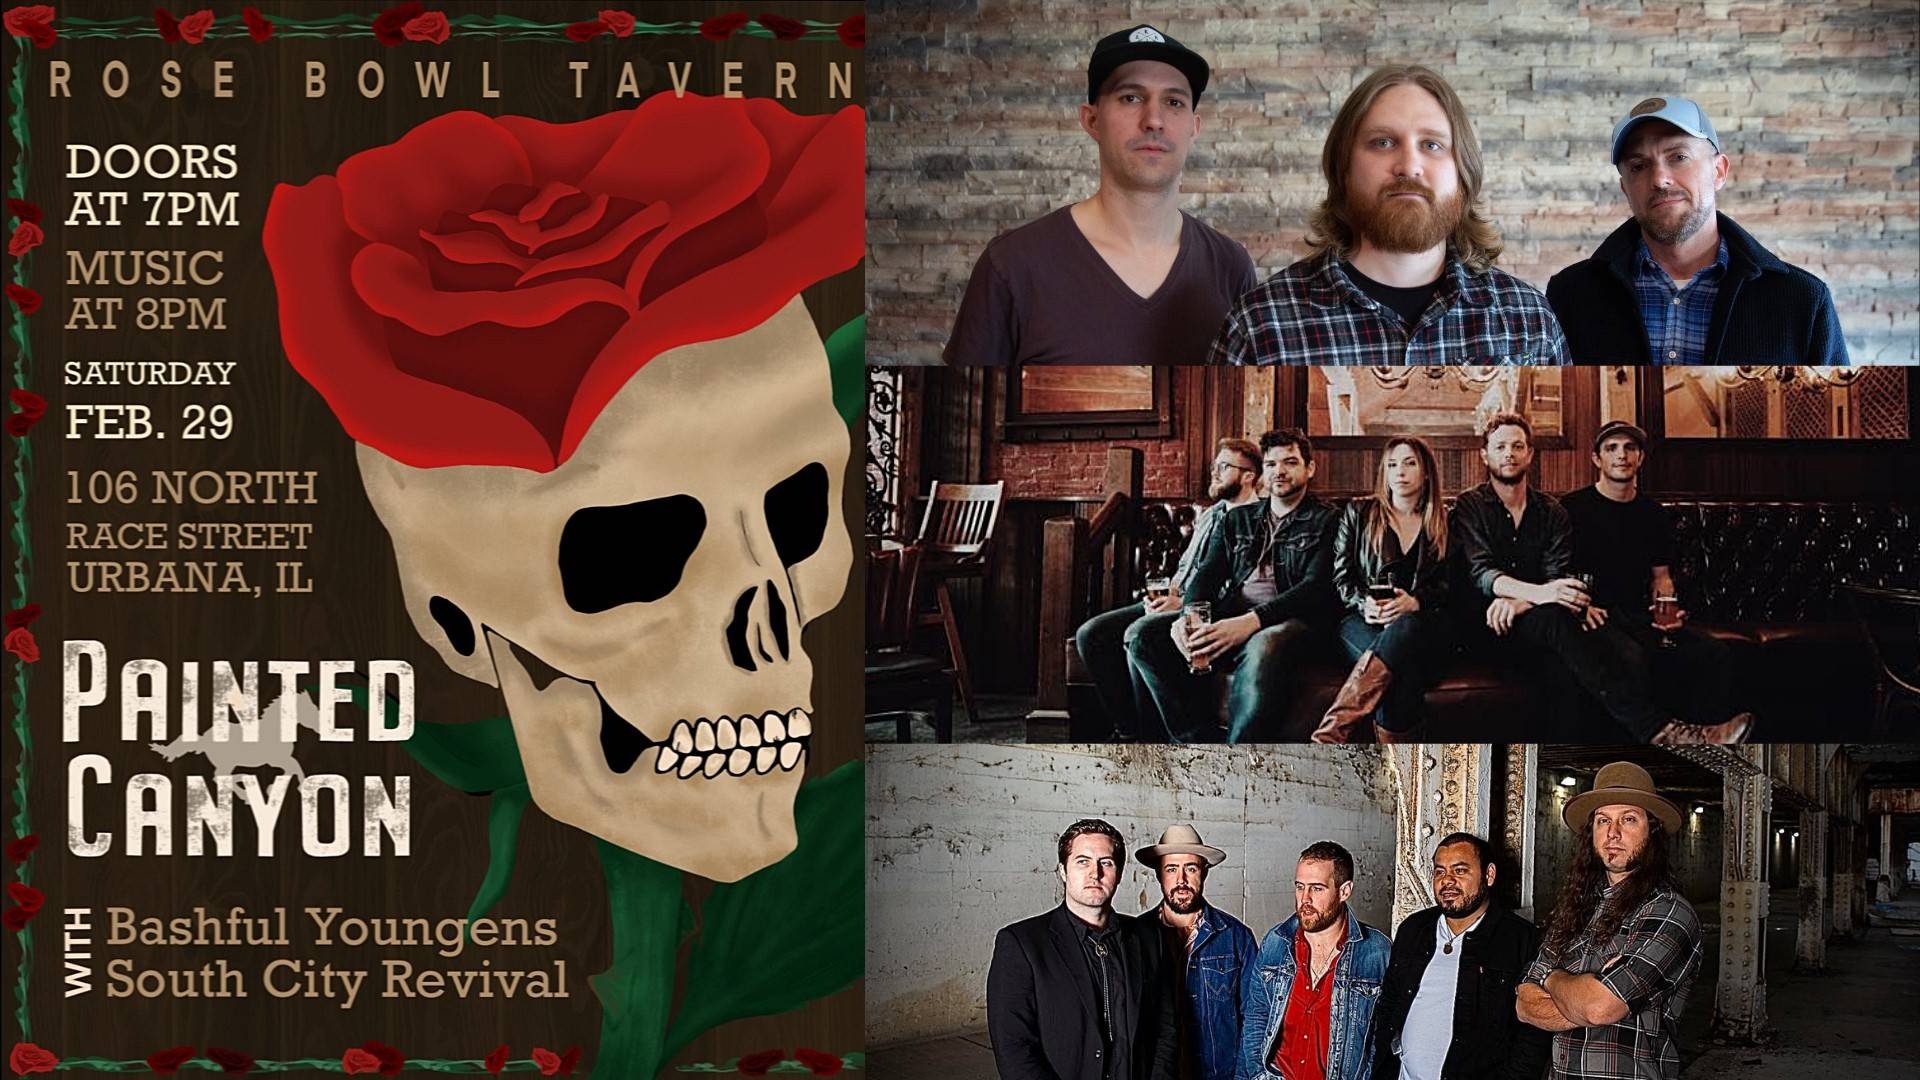 Graphic for the upcoming Painted Canyons show at the Rose Bowl Tavern. An image of a skull topped with a bright red rose. Three images of the bands that are playing are stacked on top of each other on the right hand side.